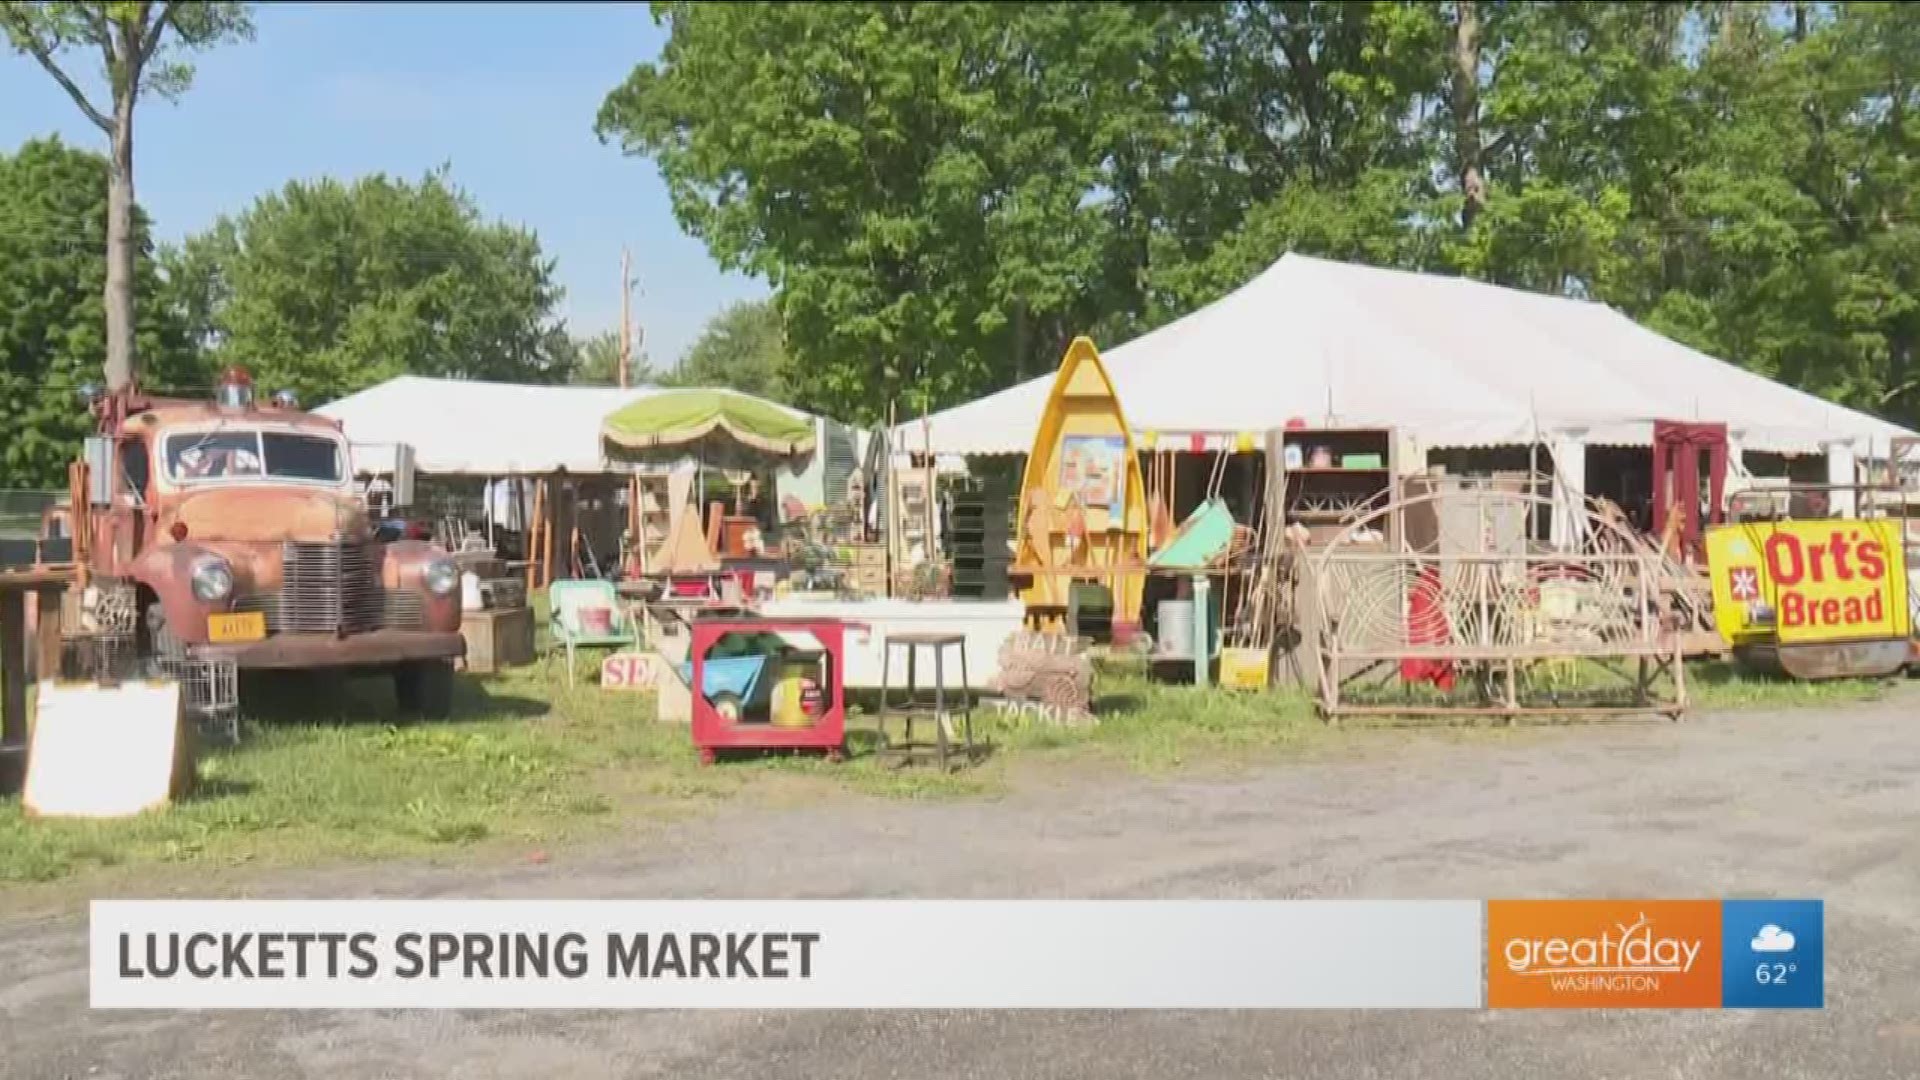 Behind the scenes of the 21st Lucketts Spring Market